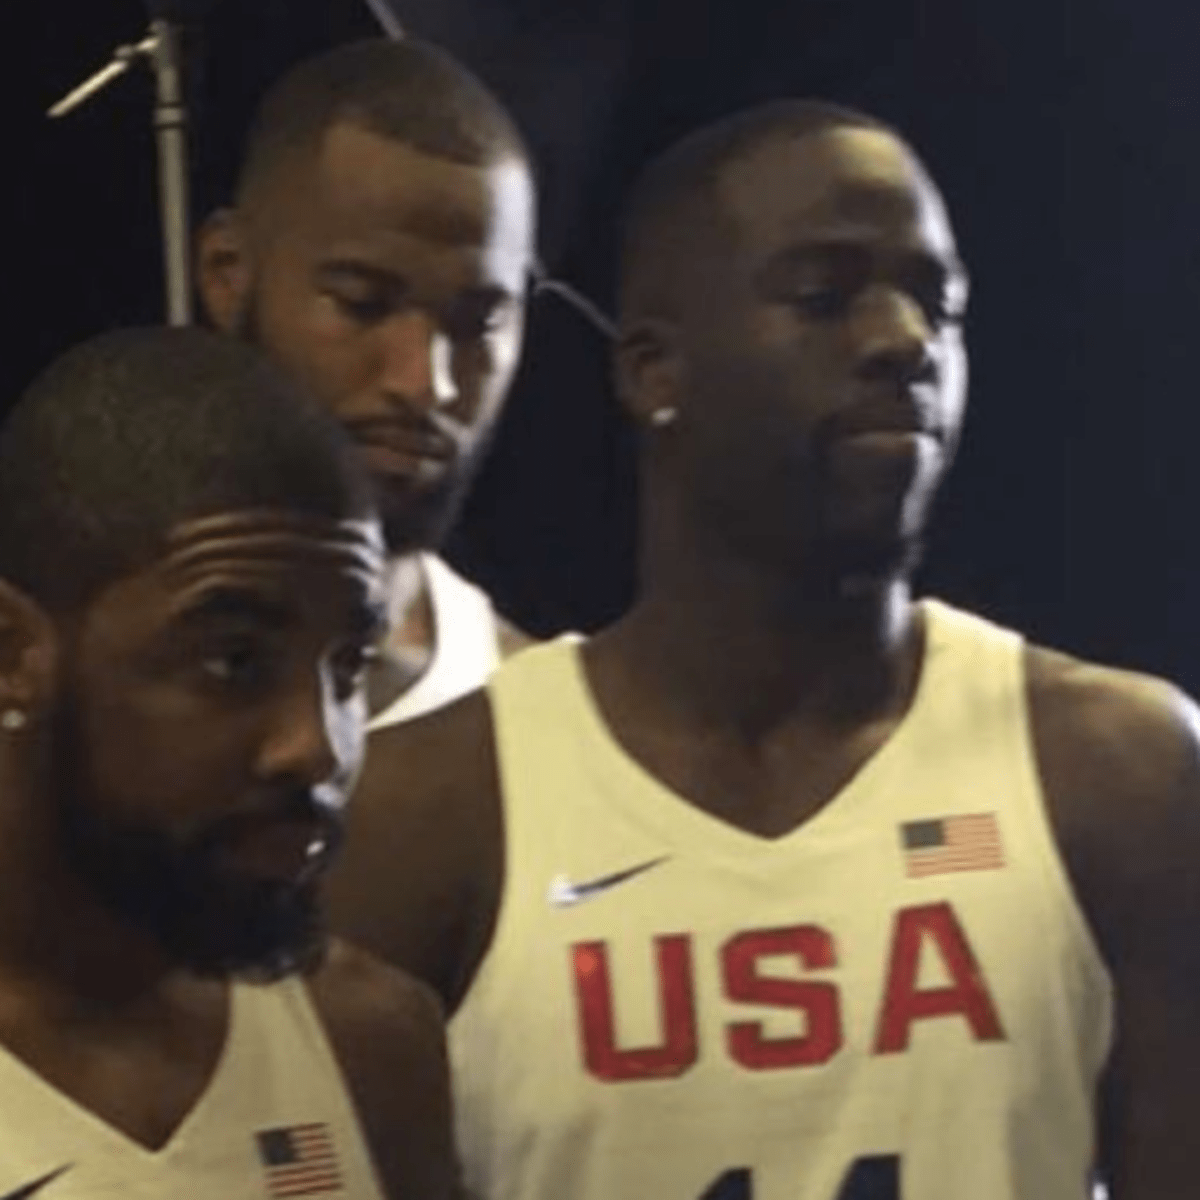 Harrison Barnes, Draymond Green & Klay Thompson to Compete with Team USA at  2016 Olympic Games